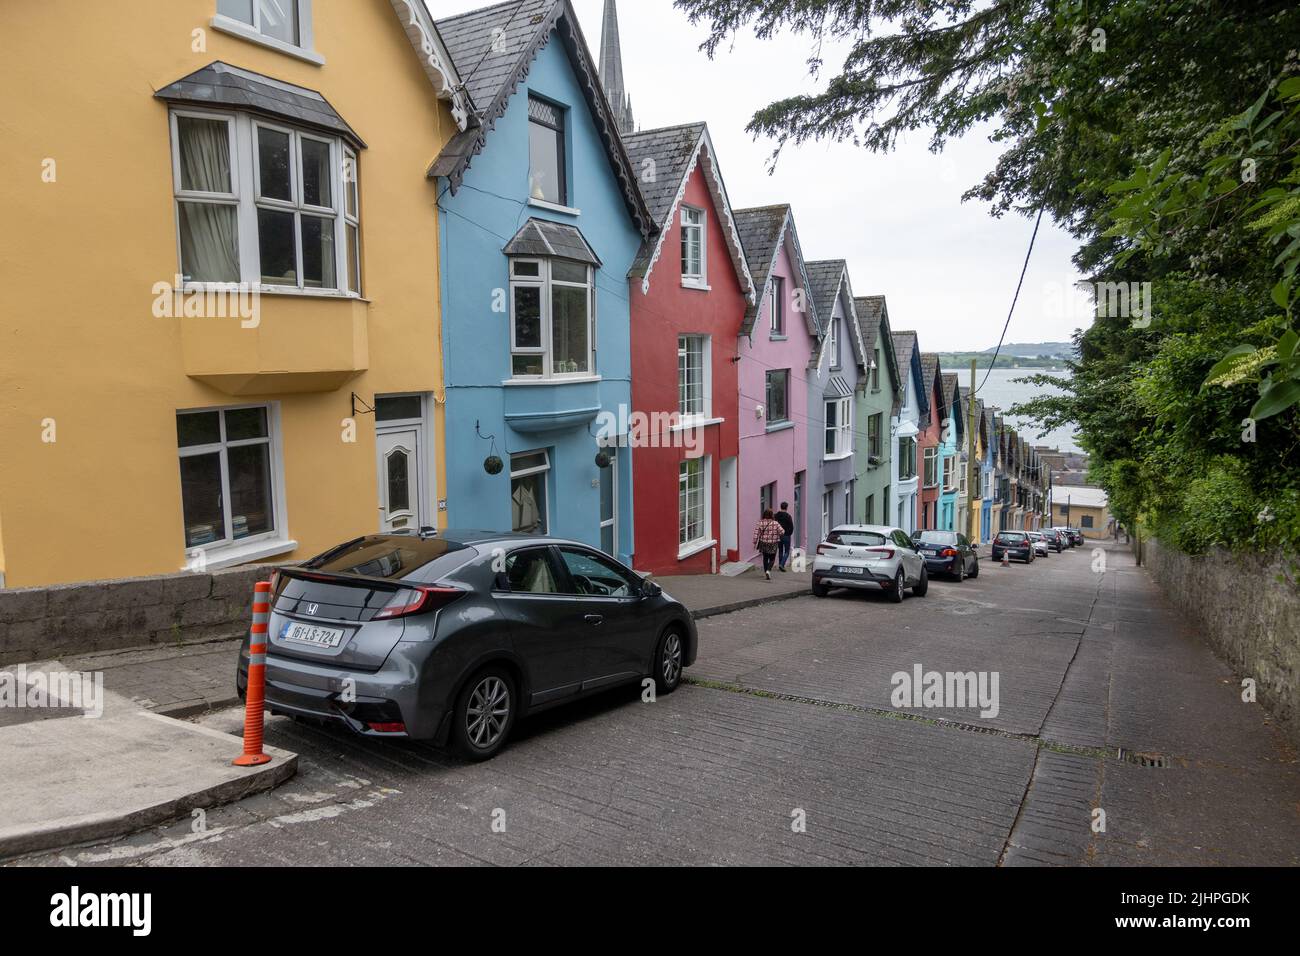 'Deck of Cards', Terraced Houses on steep hill, West View,Cobh (Queenstown), Ireland Stock Photo